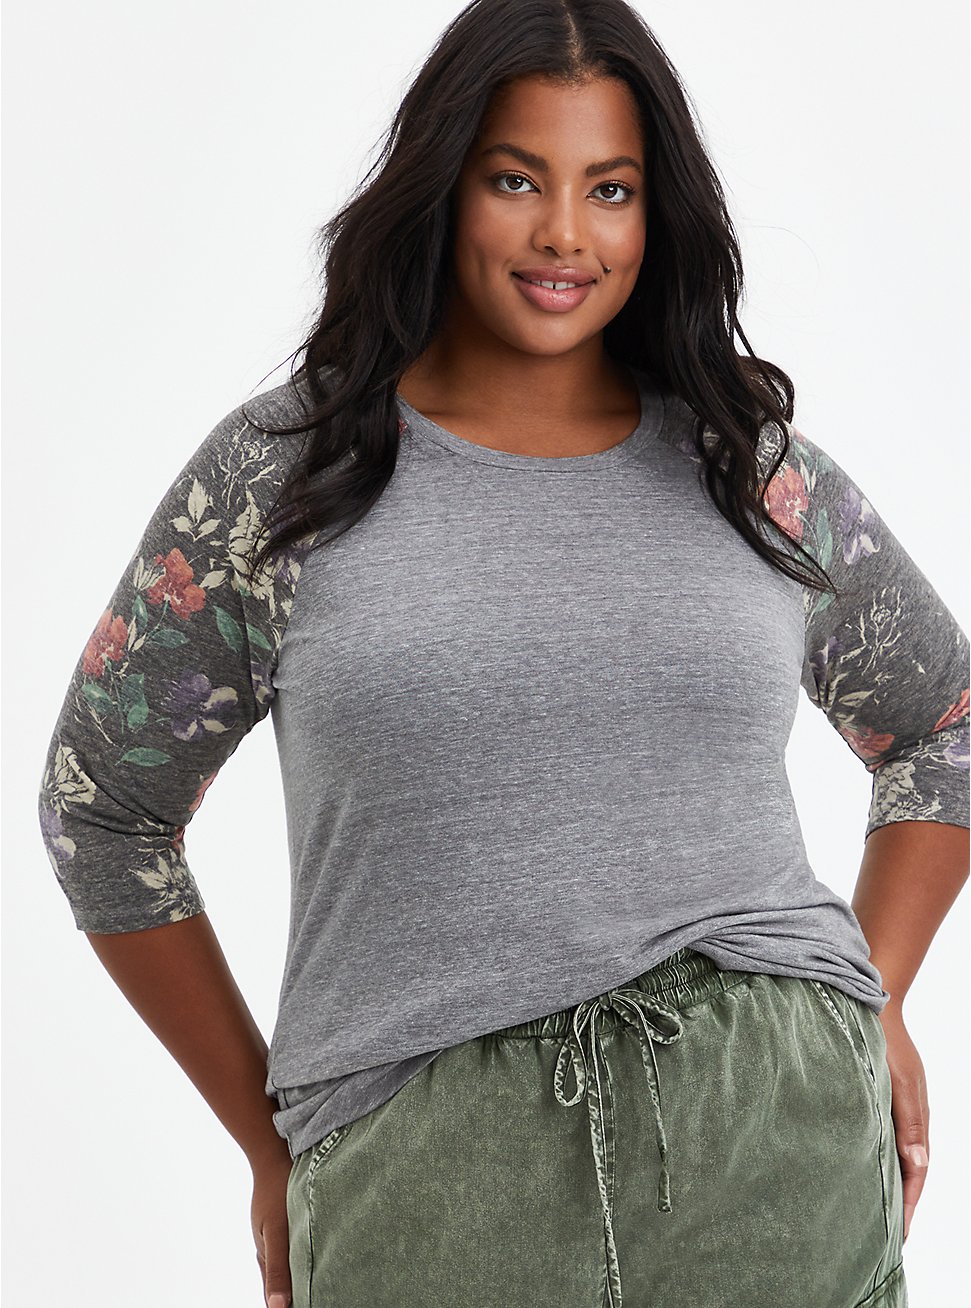 Plus Size Classic Fit Raglan Tee - Heather Grey Floral 3/4 Sleeve, OTHER PRINTS, hi-res